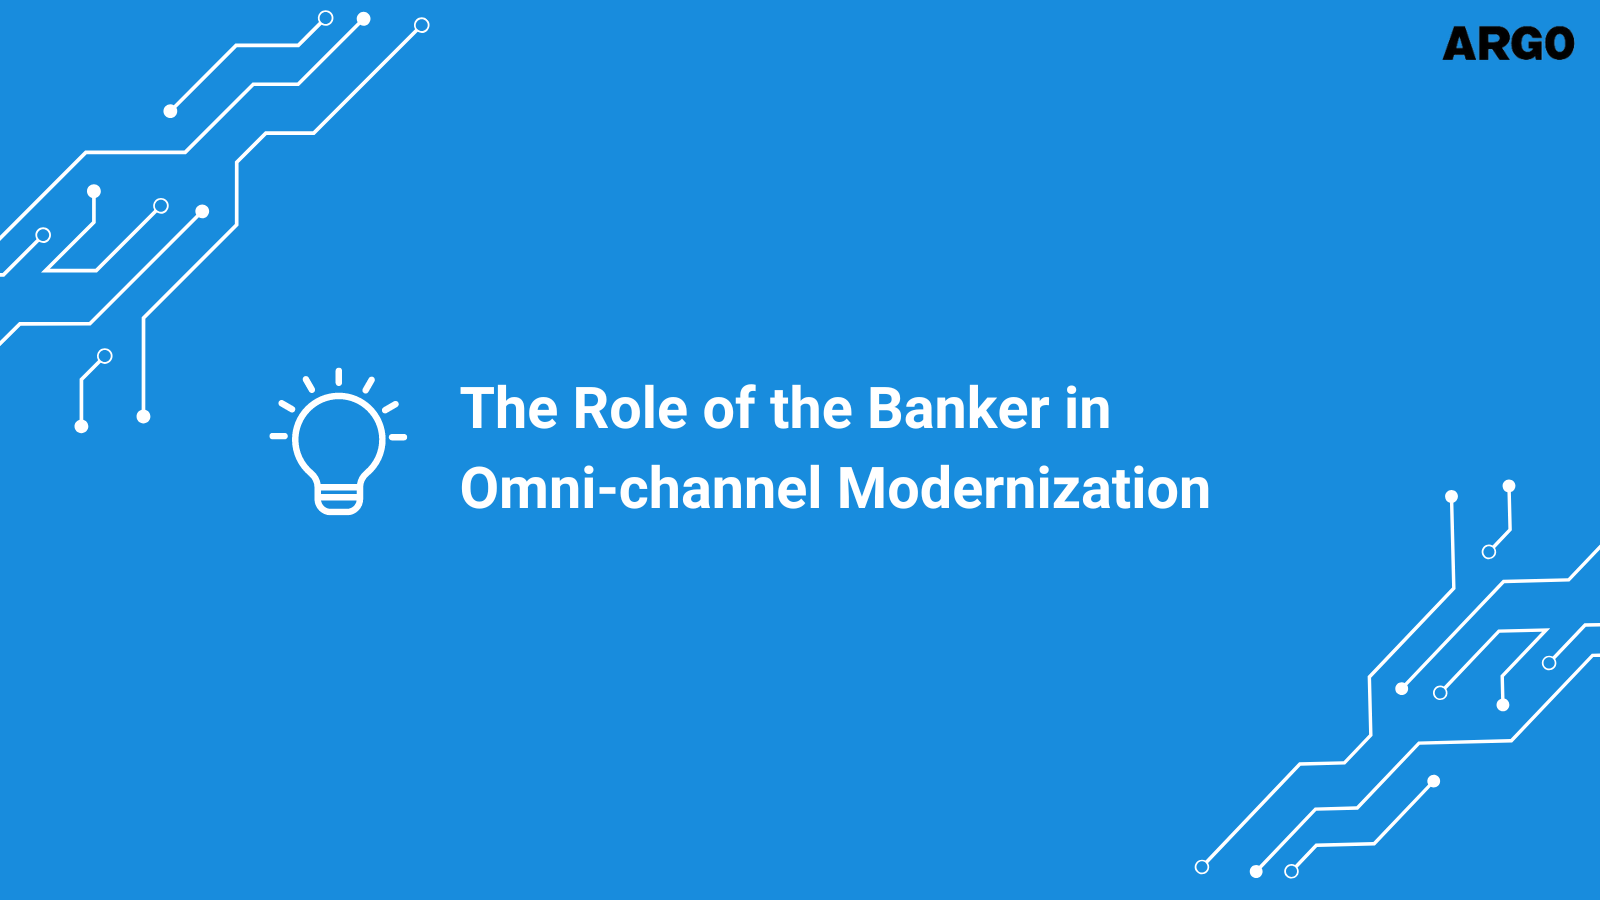 The Role of the Banker in Omni-channel Modernization